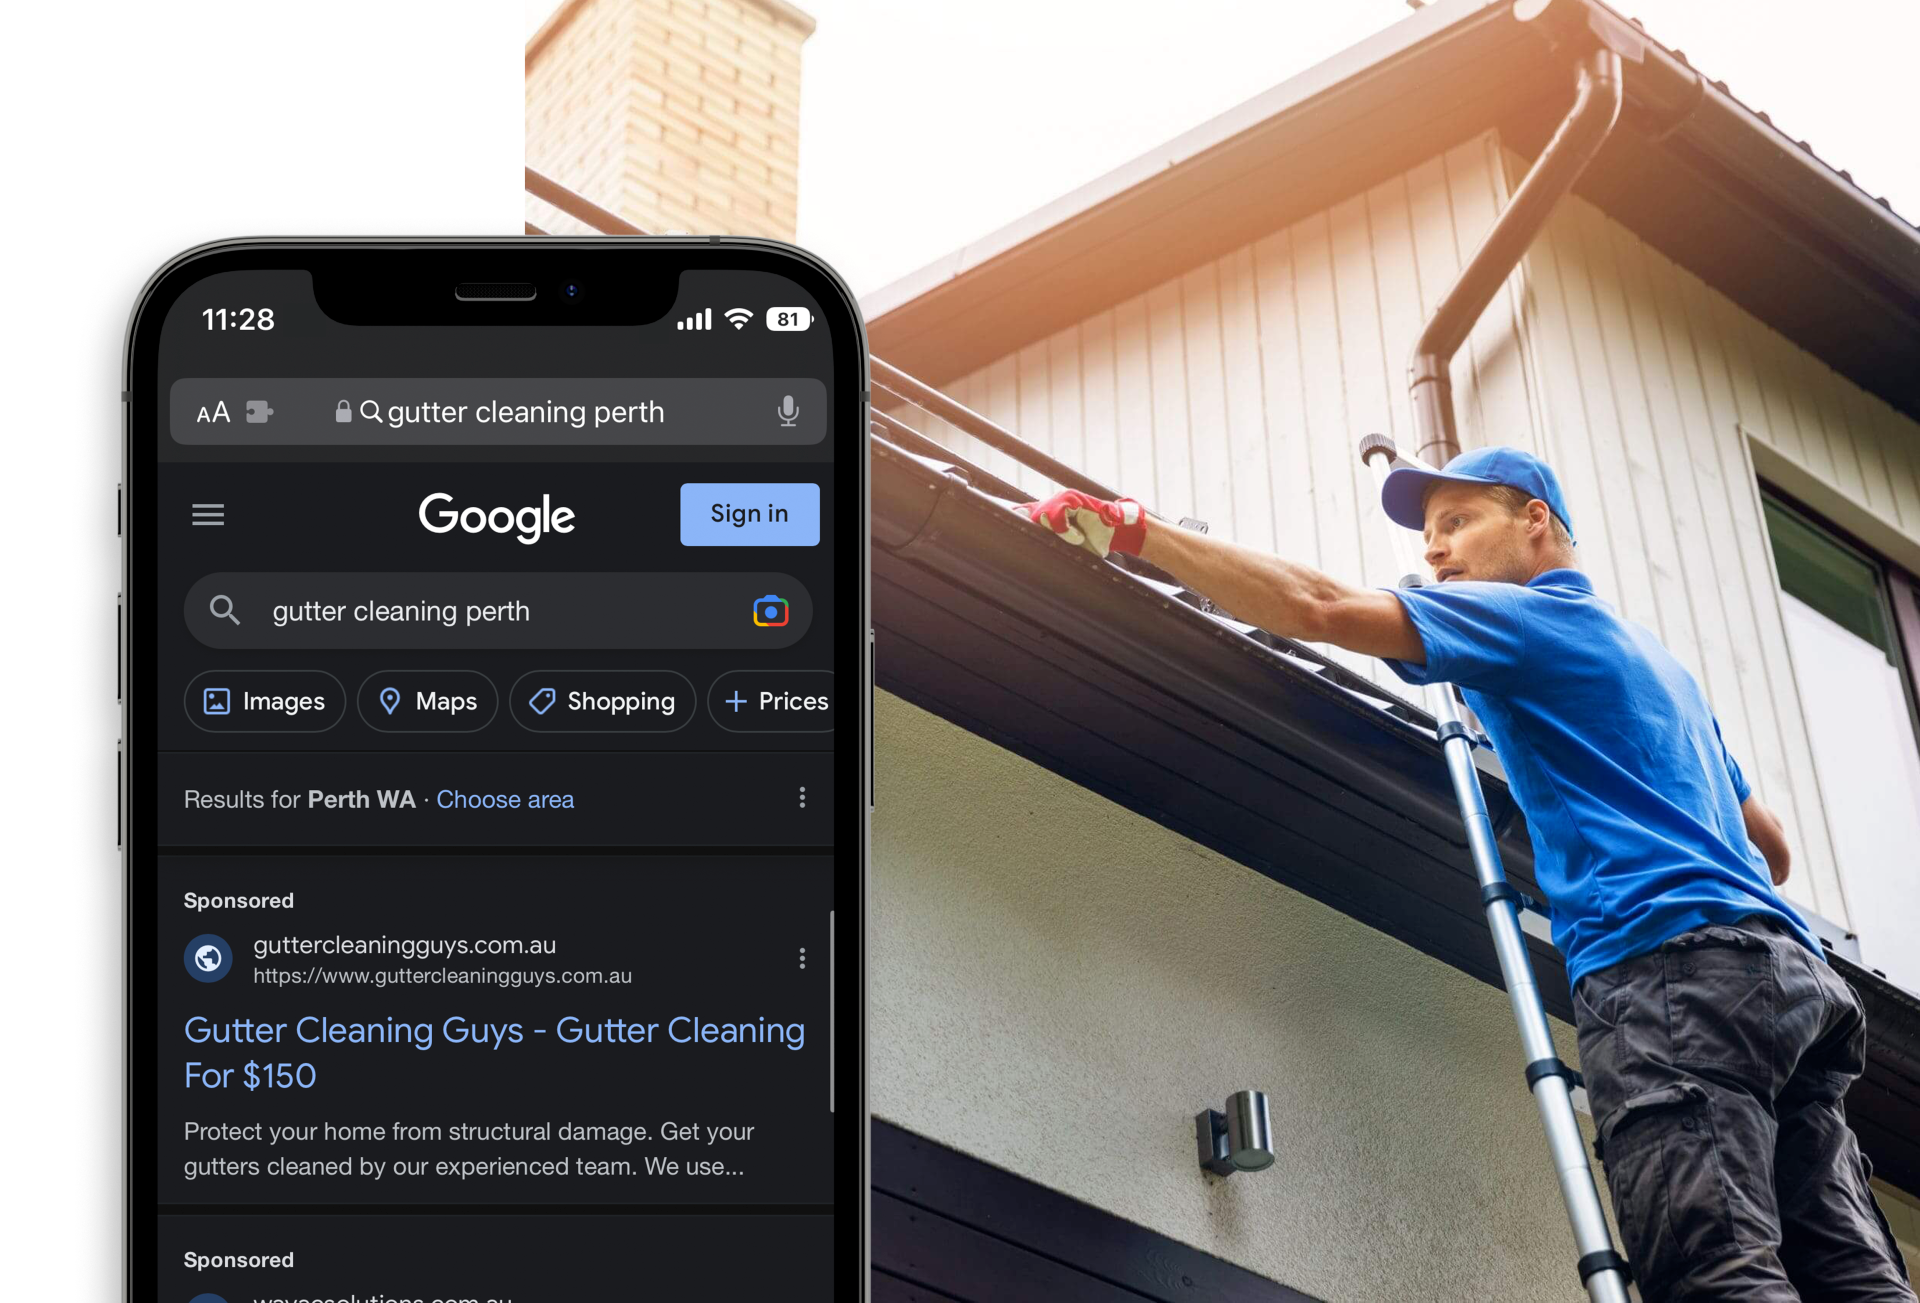 Gutter Cleaning Guys Ad Mockup